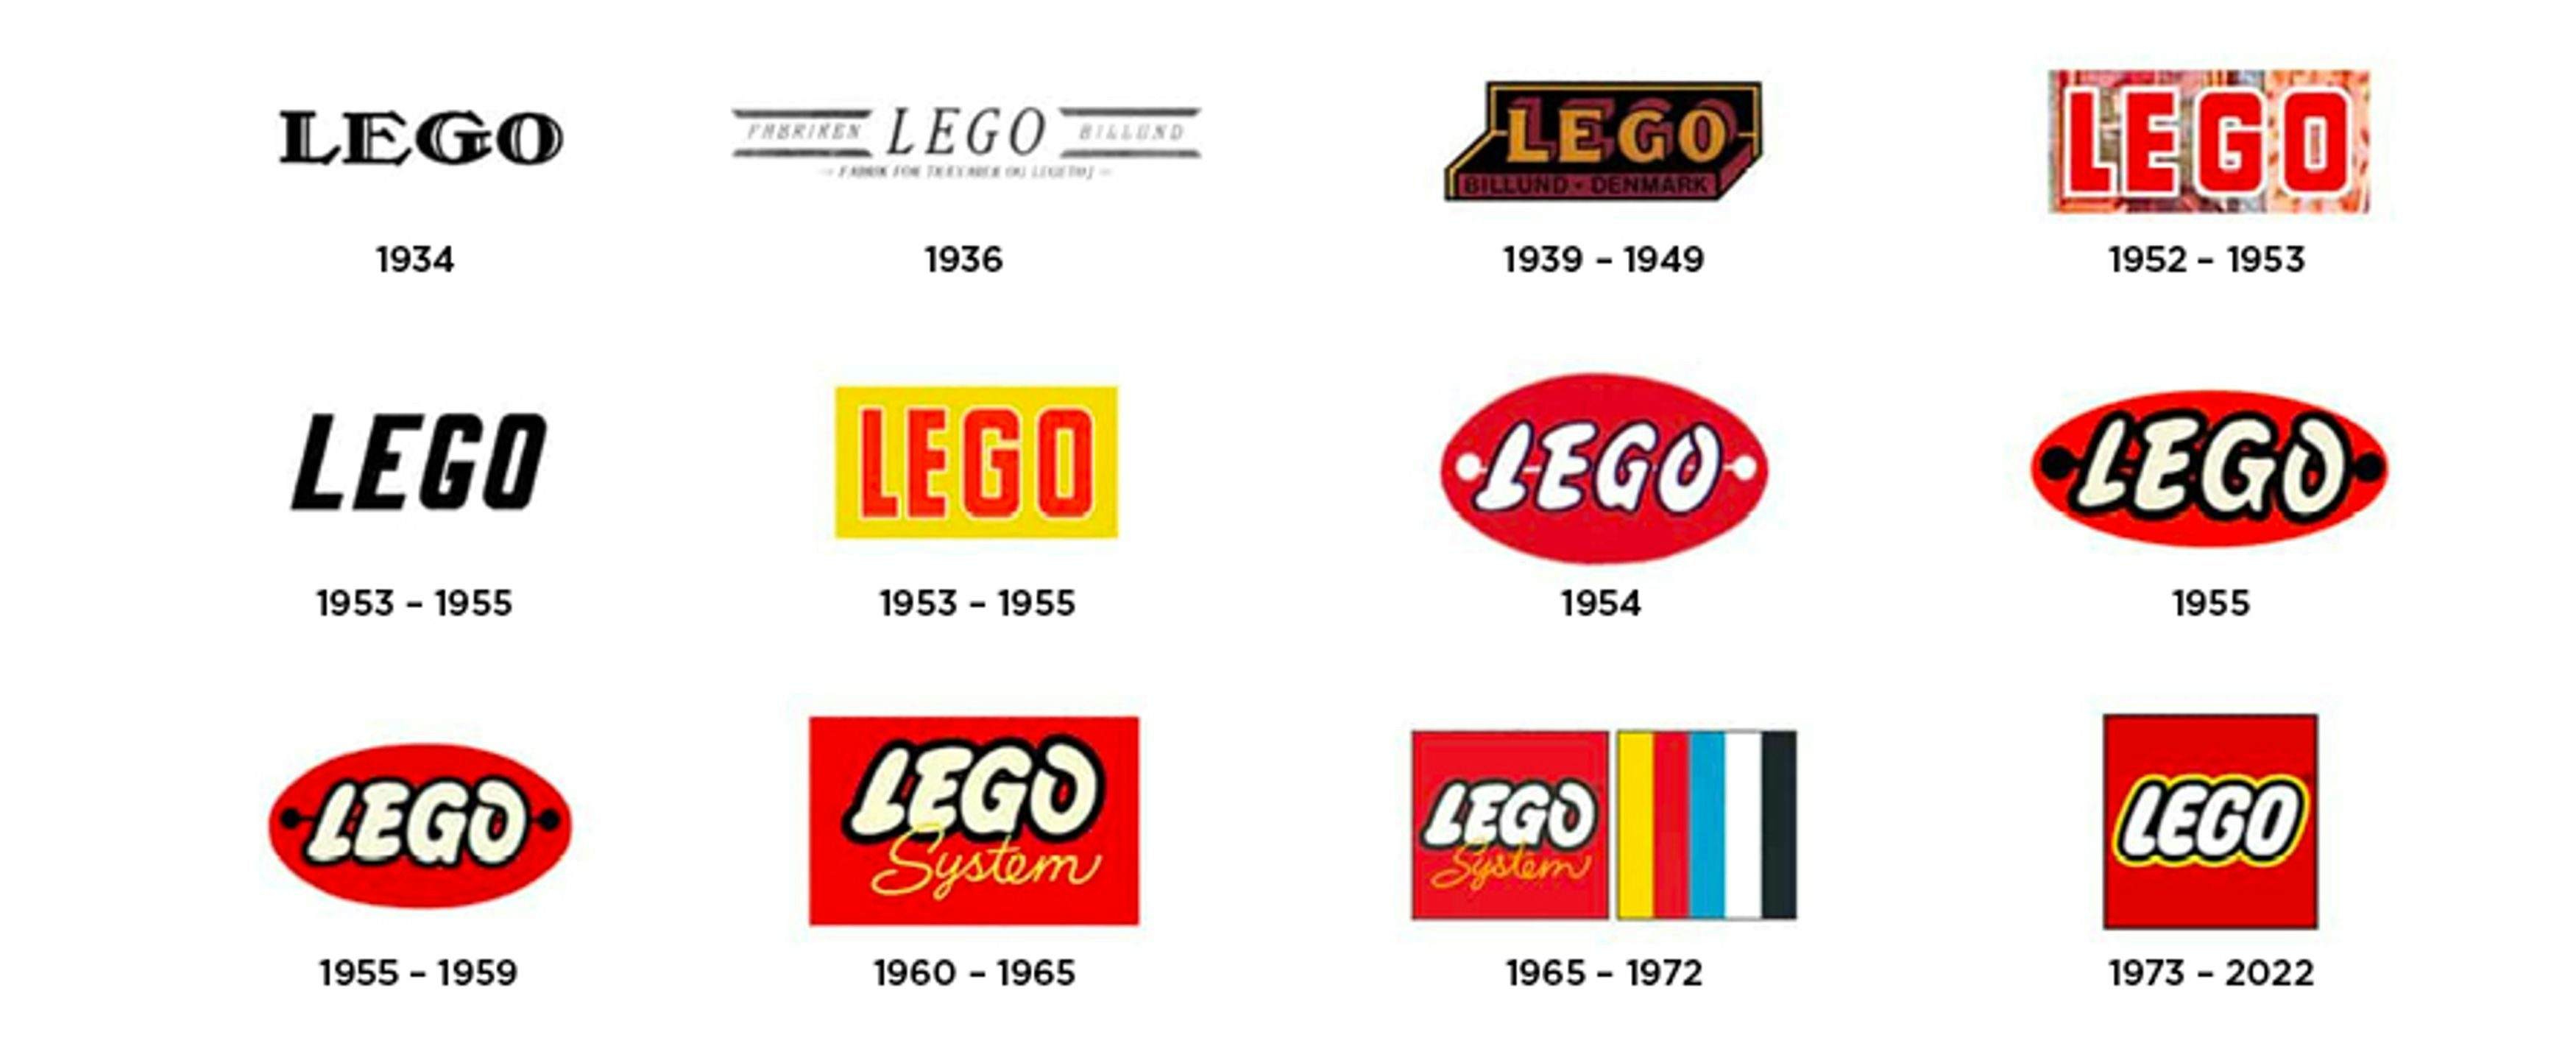 A chronological display of LEGO logos from 1934 to 2022, showing the evolution of the logo design over the years.